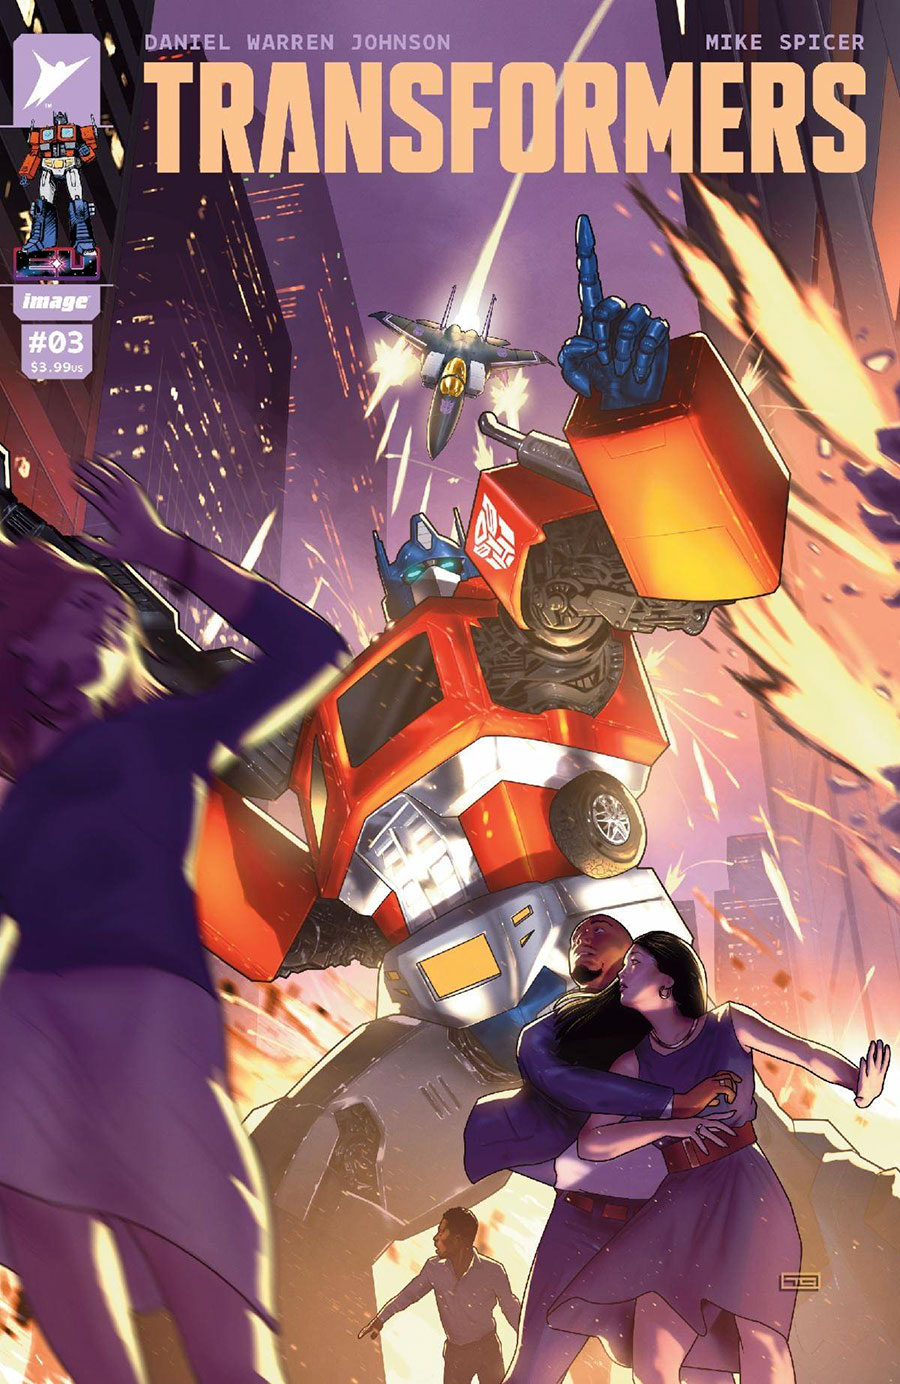 Transformers Vol 5 #3 Cover B Variant Taurin Clarke Cover (Limit 1 Per Customer)